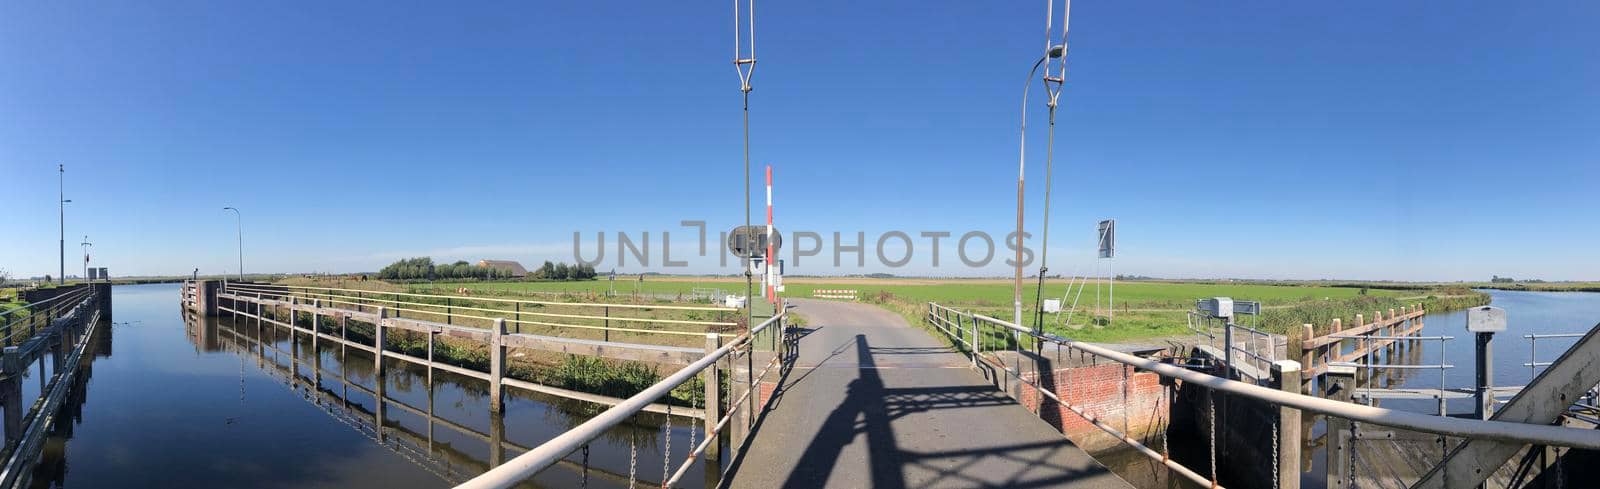 Panorama from a canal lock in Electra The Netherlands